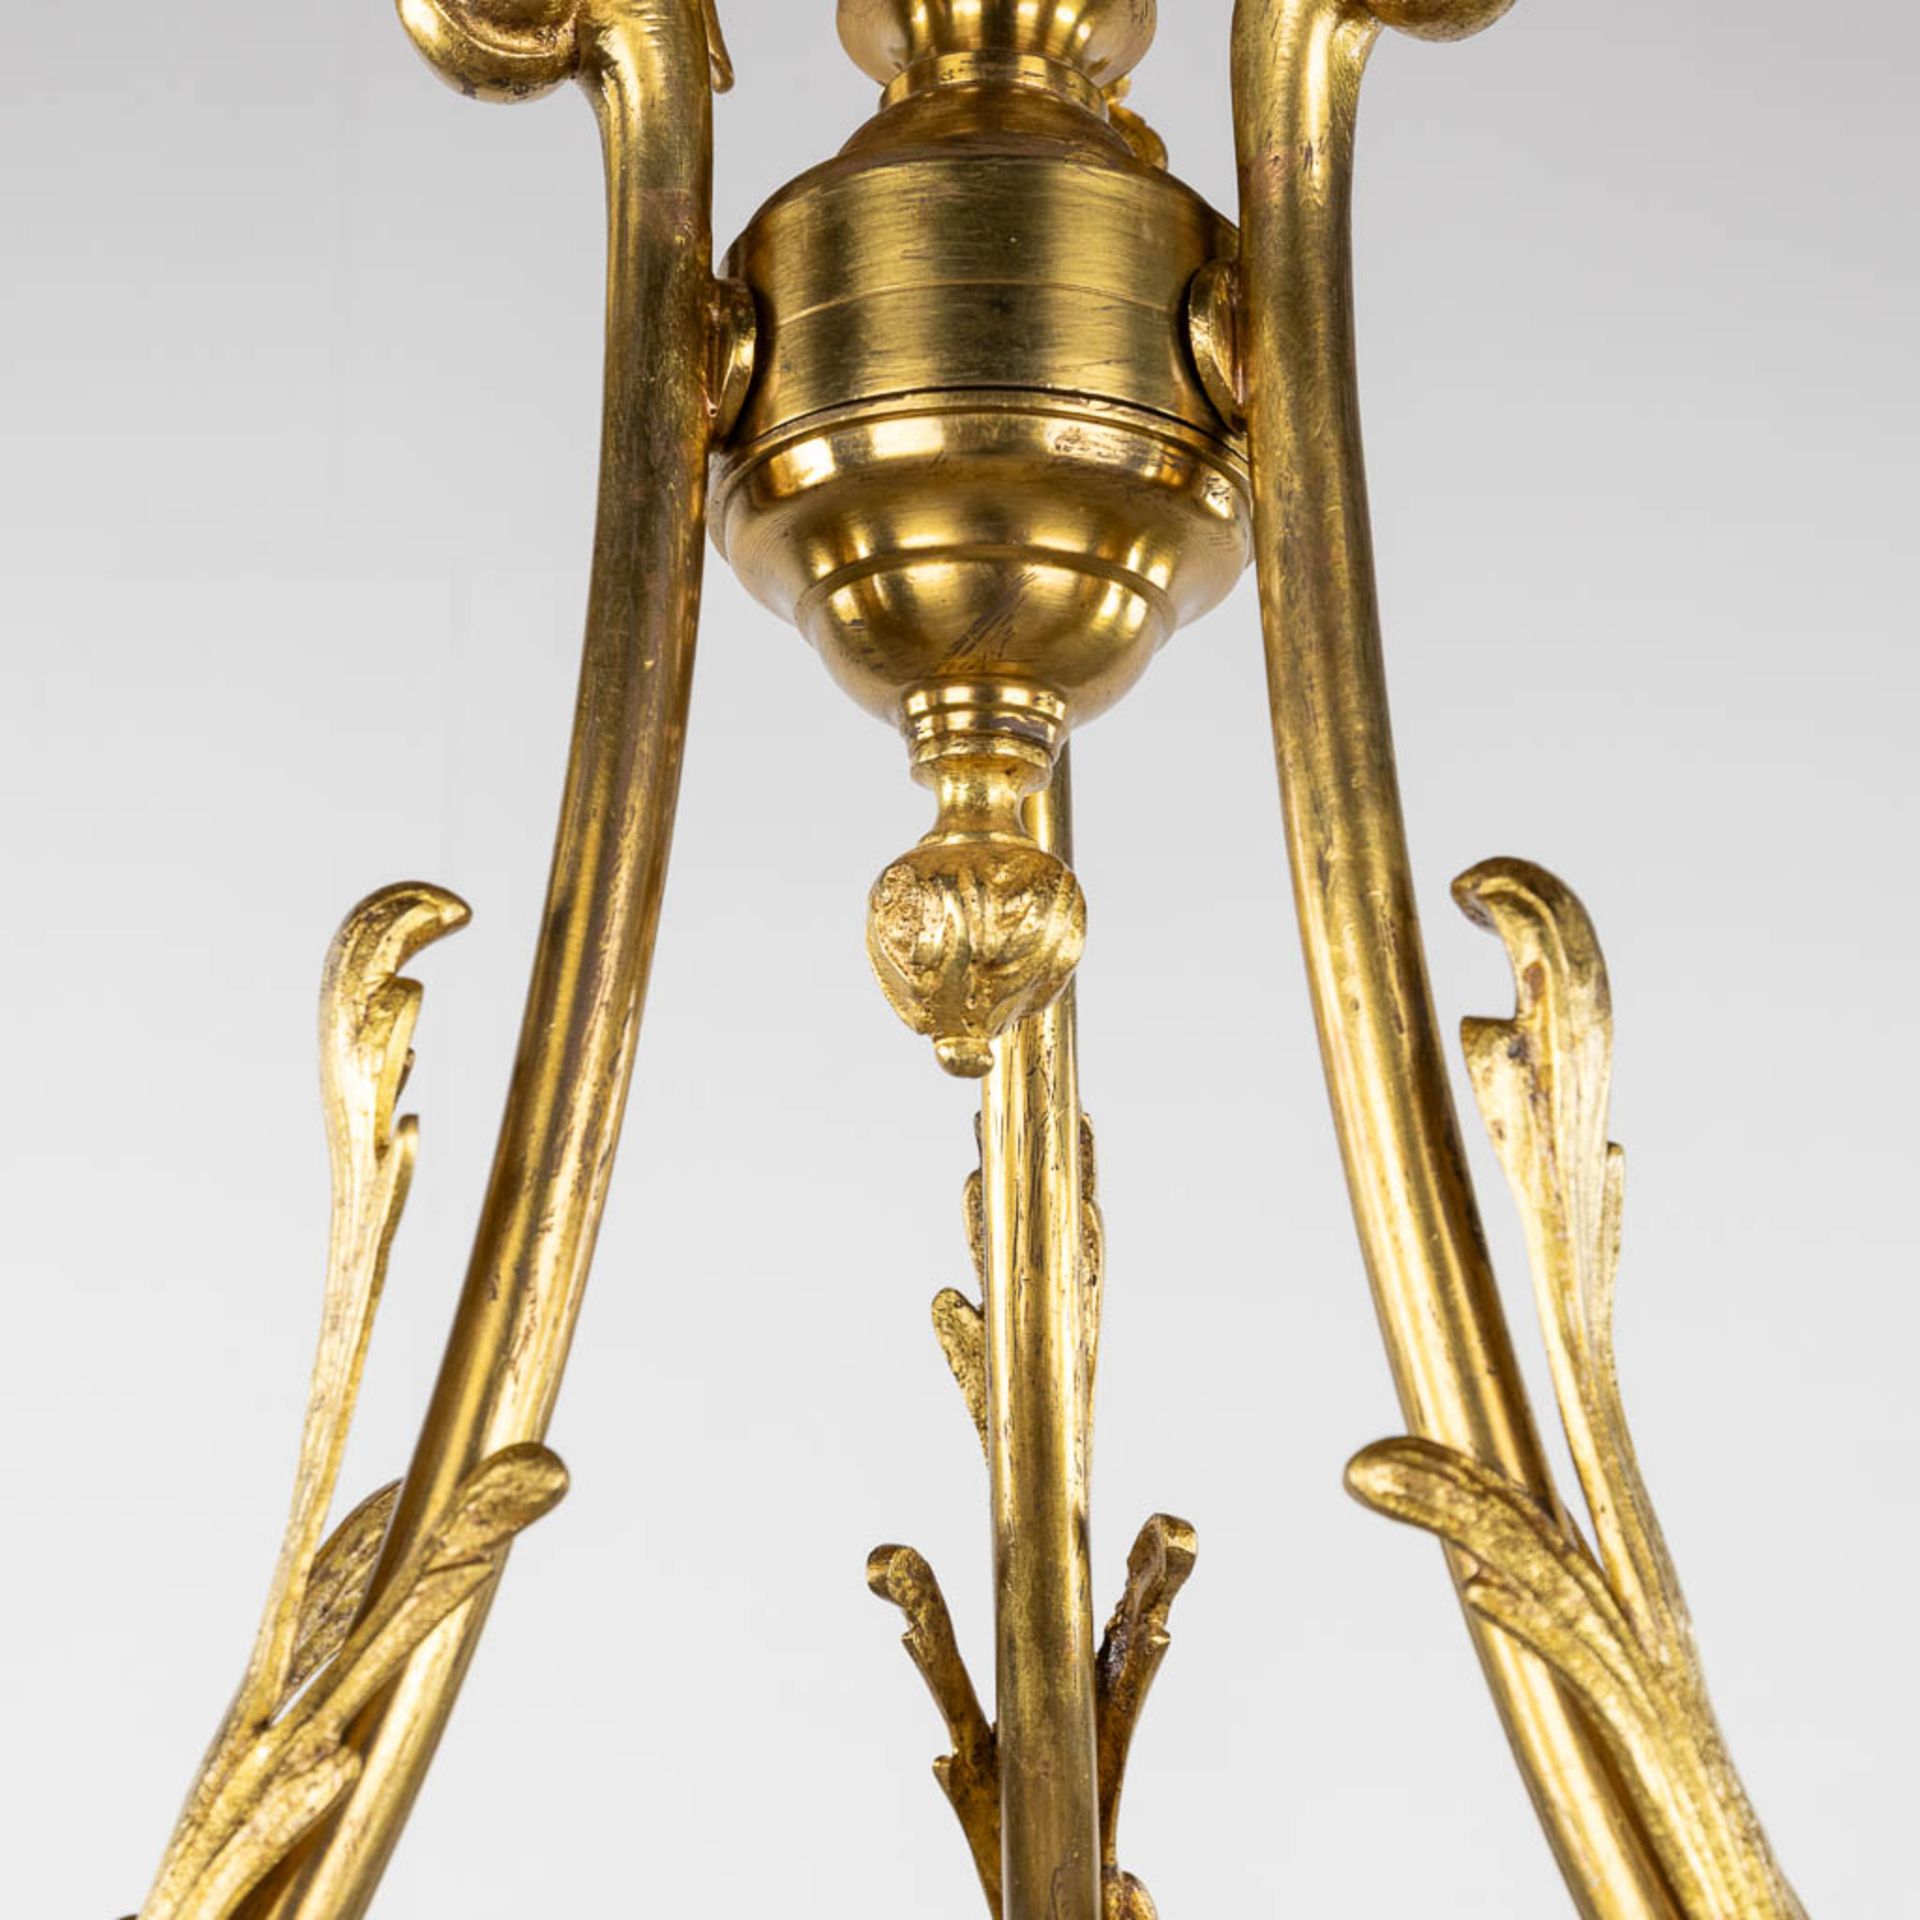 A chandelier, bronze with glass shades and a flambeau, decorated with Satyr figurines. (H:88 x D:54 - Image 6 of 13